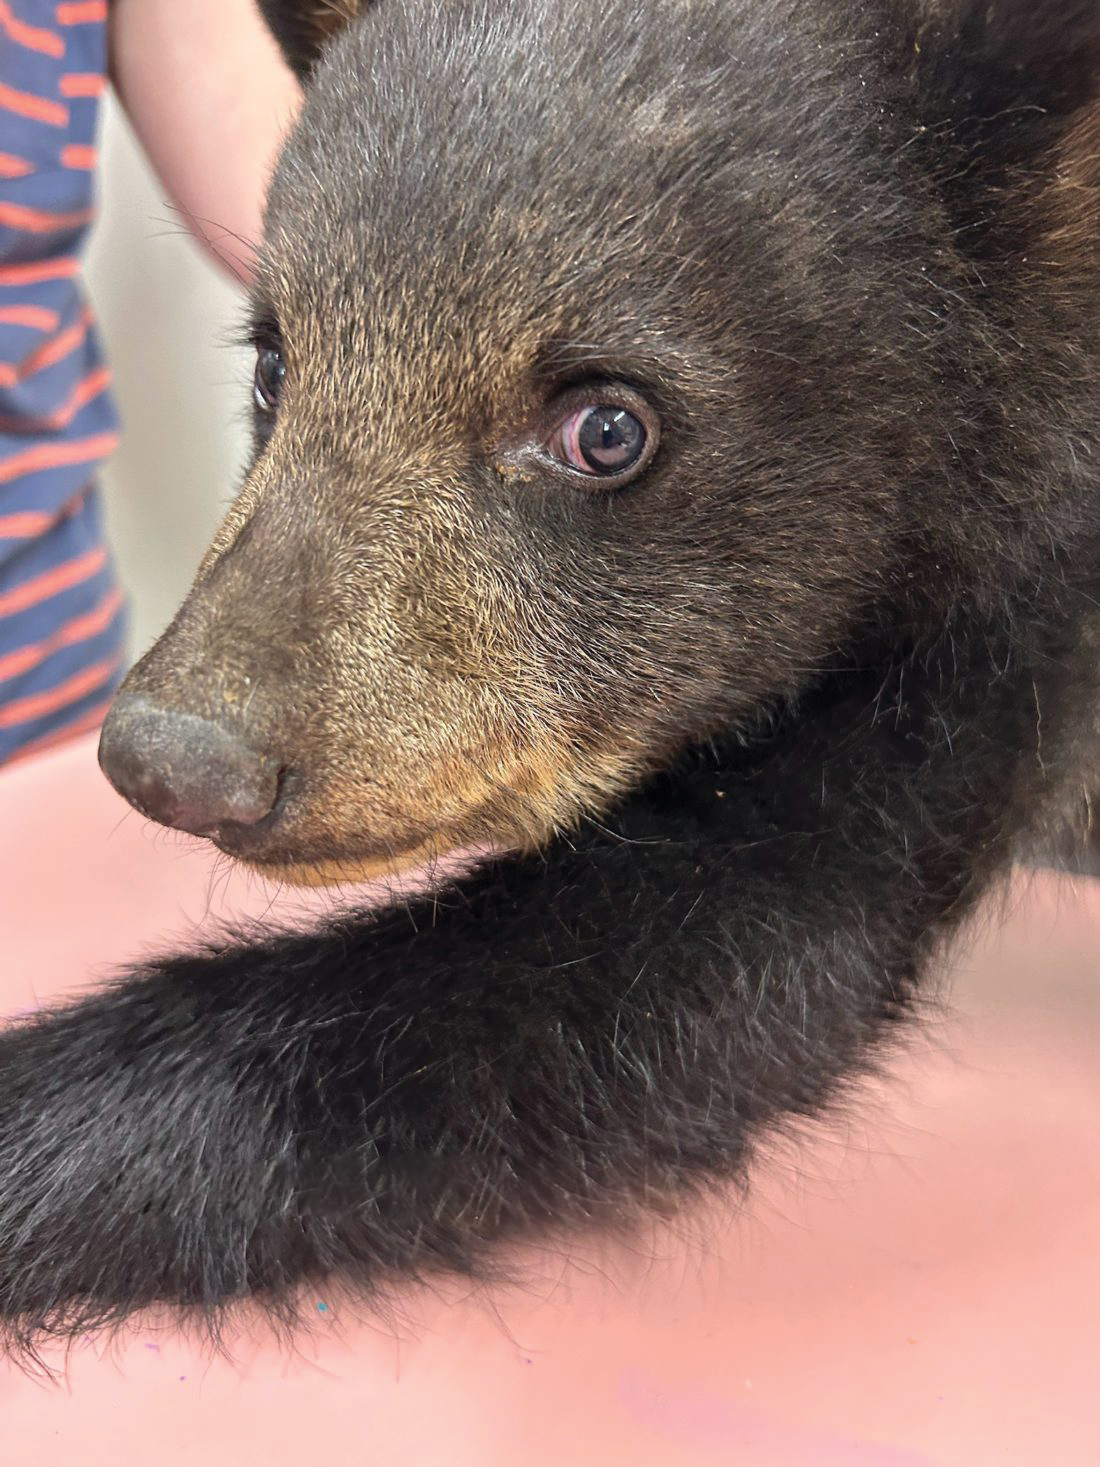 Business, nonprofit roundup: Bear cub pulled from tree ‘doing well’